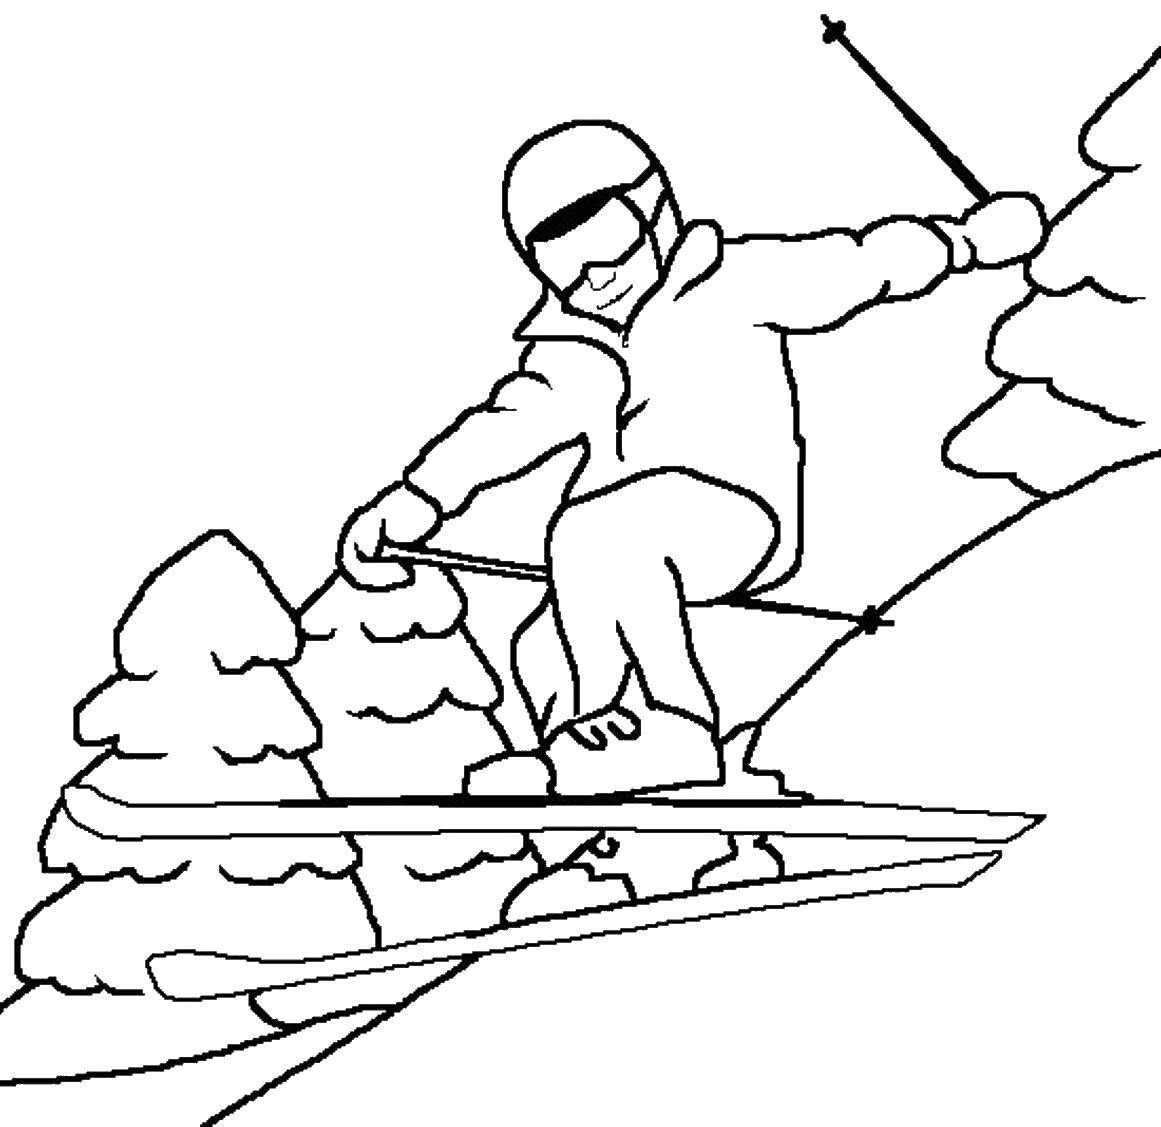 Coloring Skier skiing. Category Sports. Tags:  Sports, skiing.